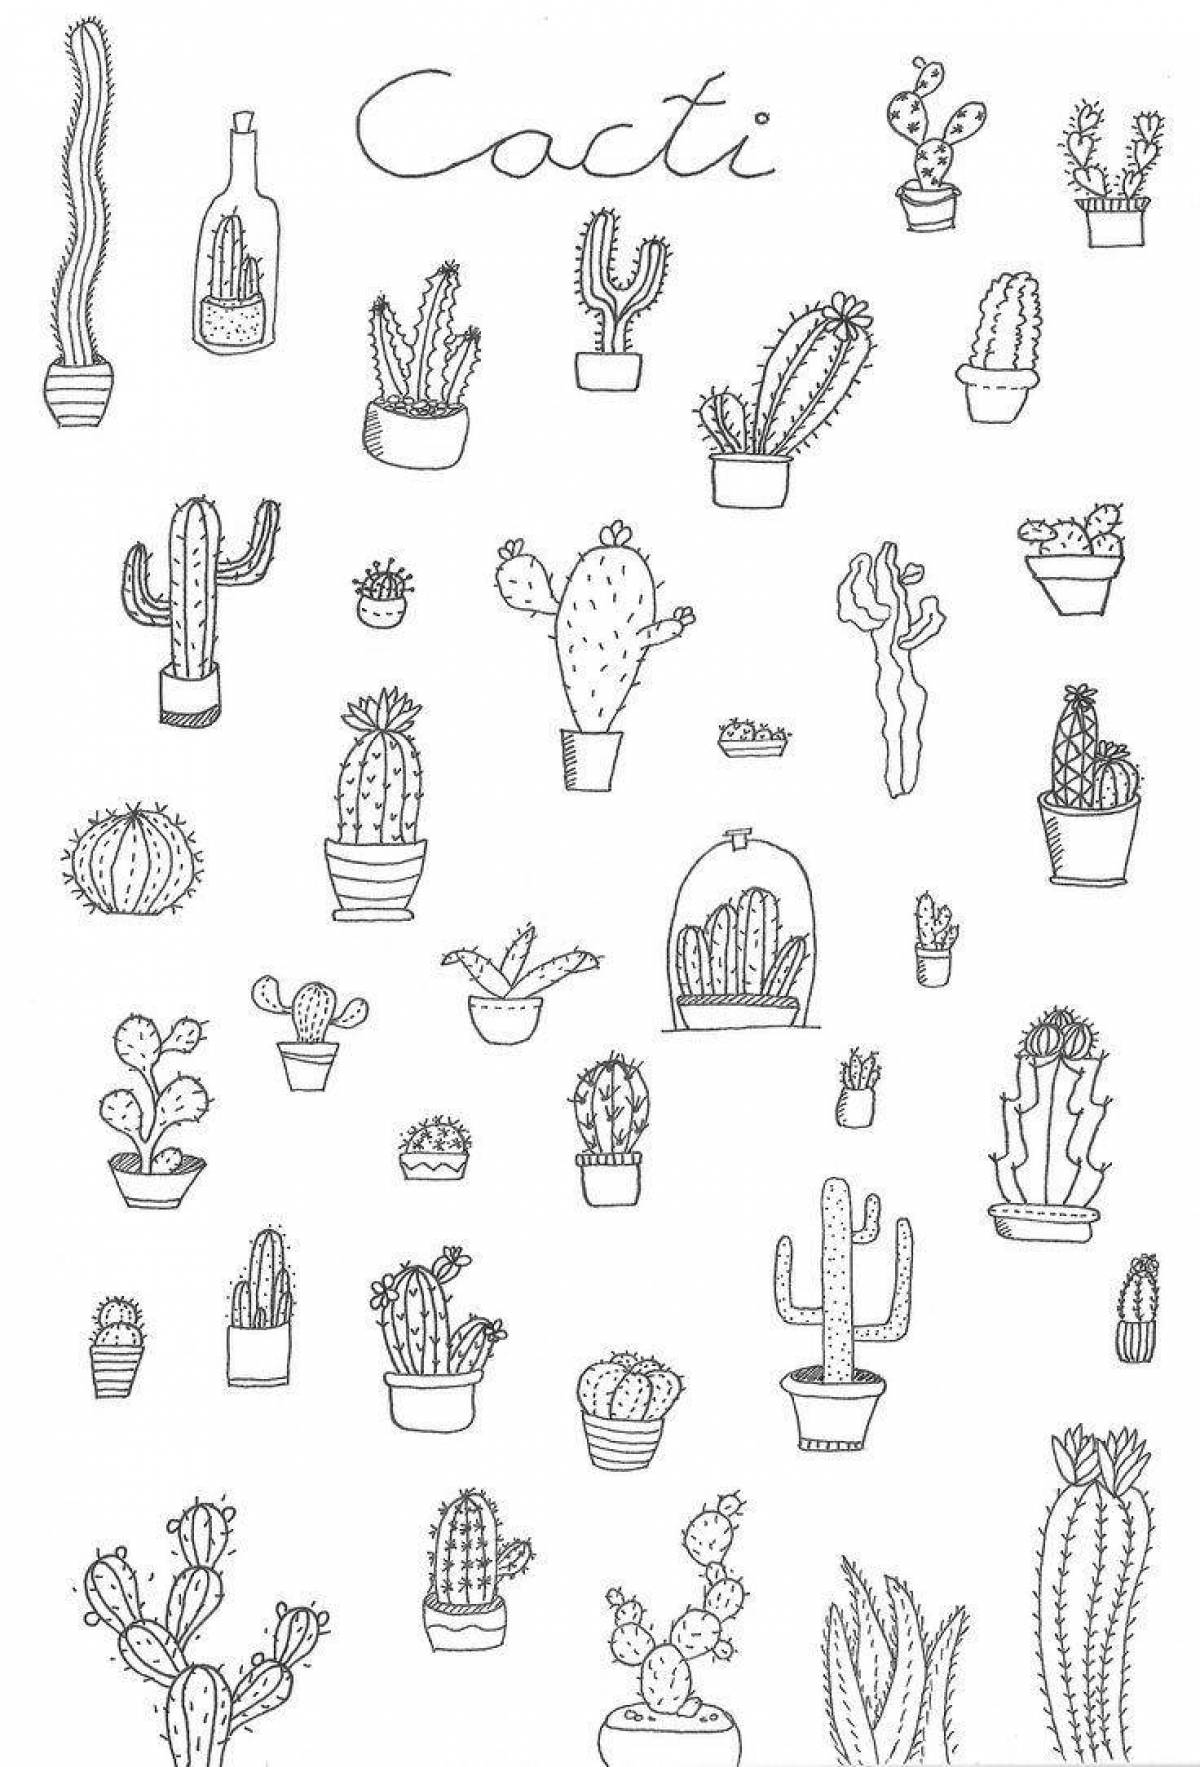 Aesthetics of trendy coloring pages